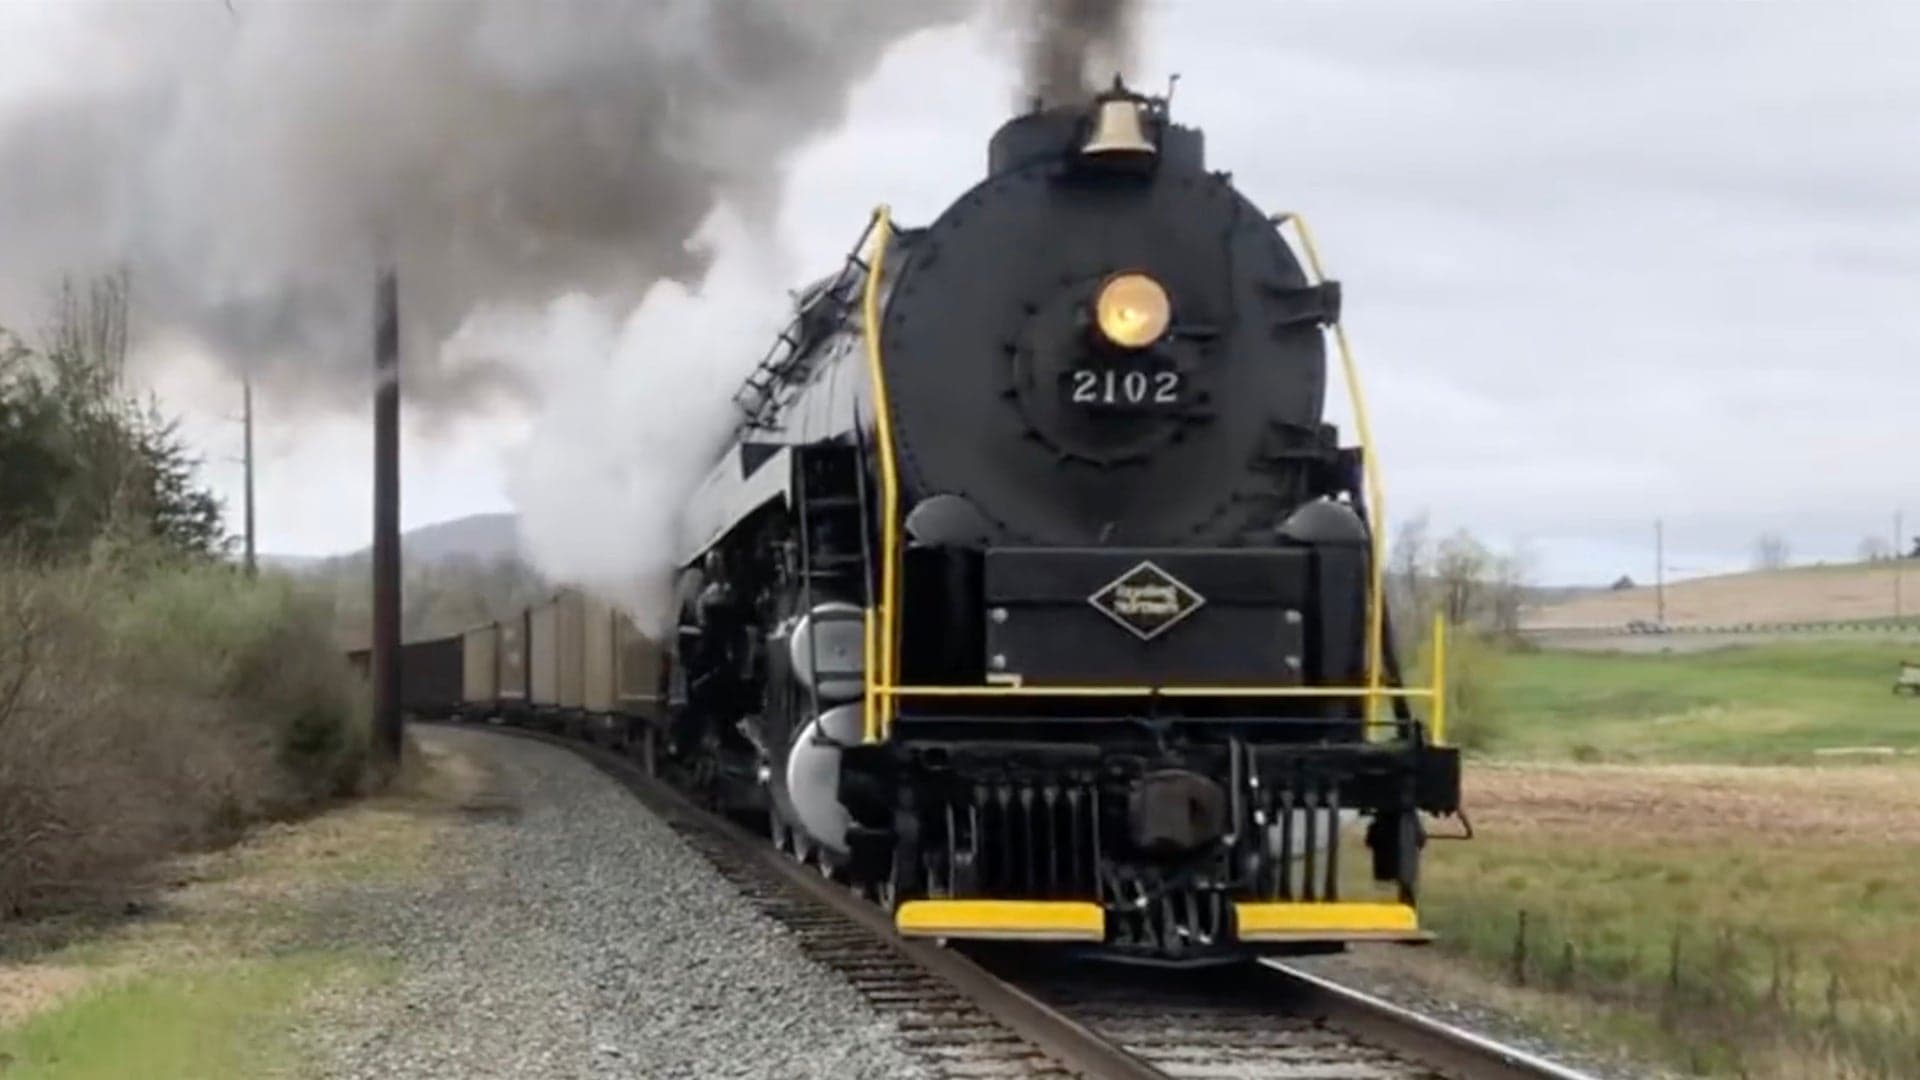 This Steam Train From 1945 Just Hauled 50 Freight Cars in 2022